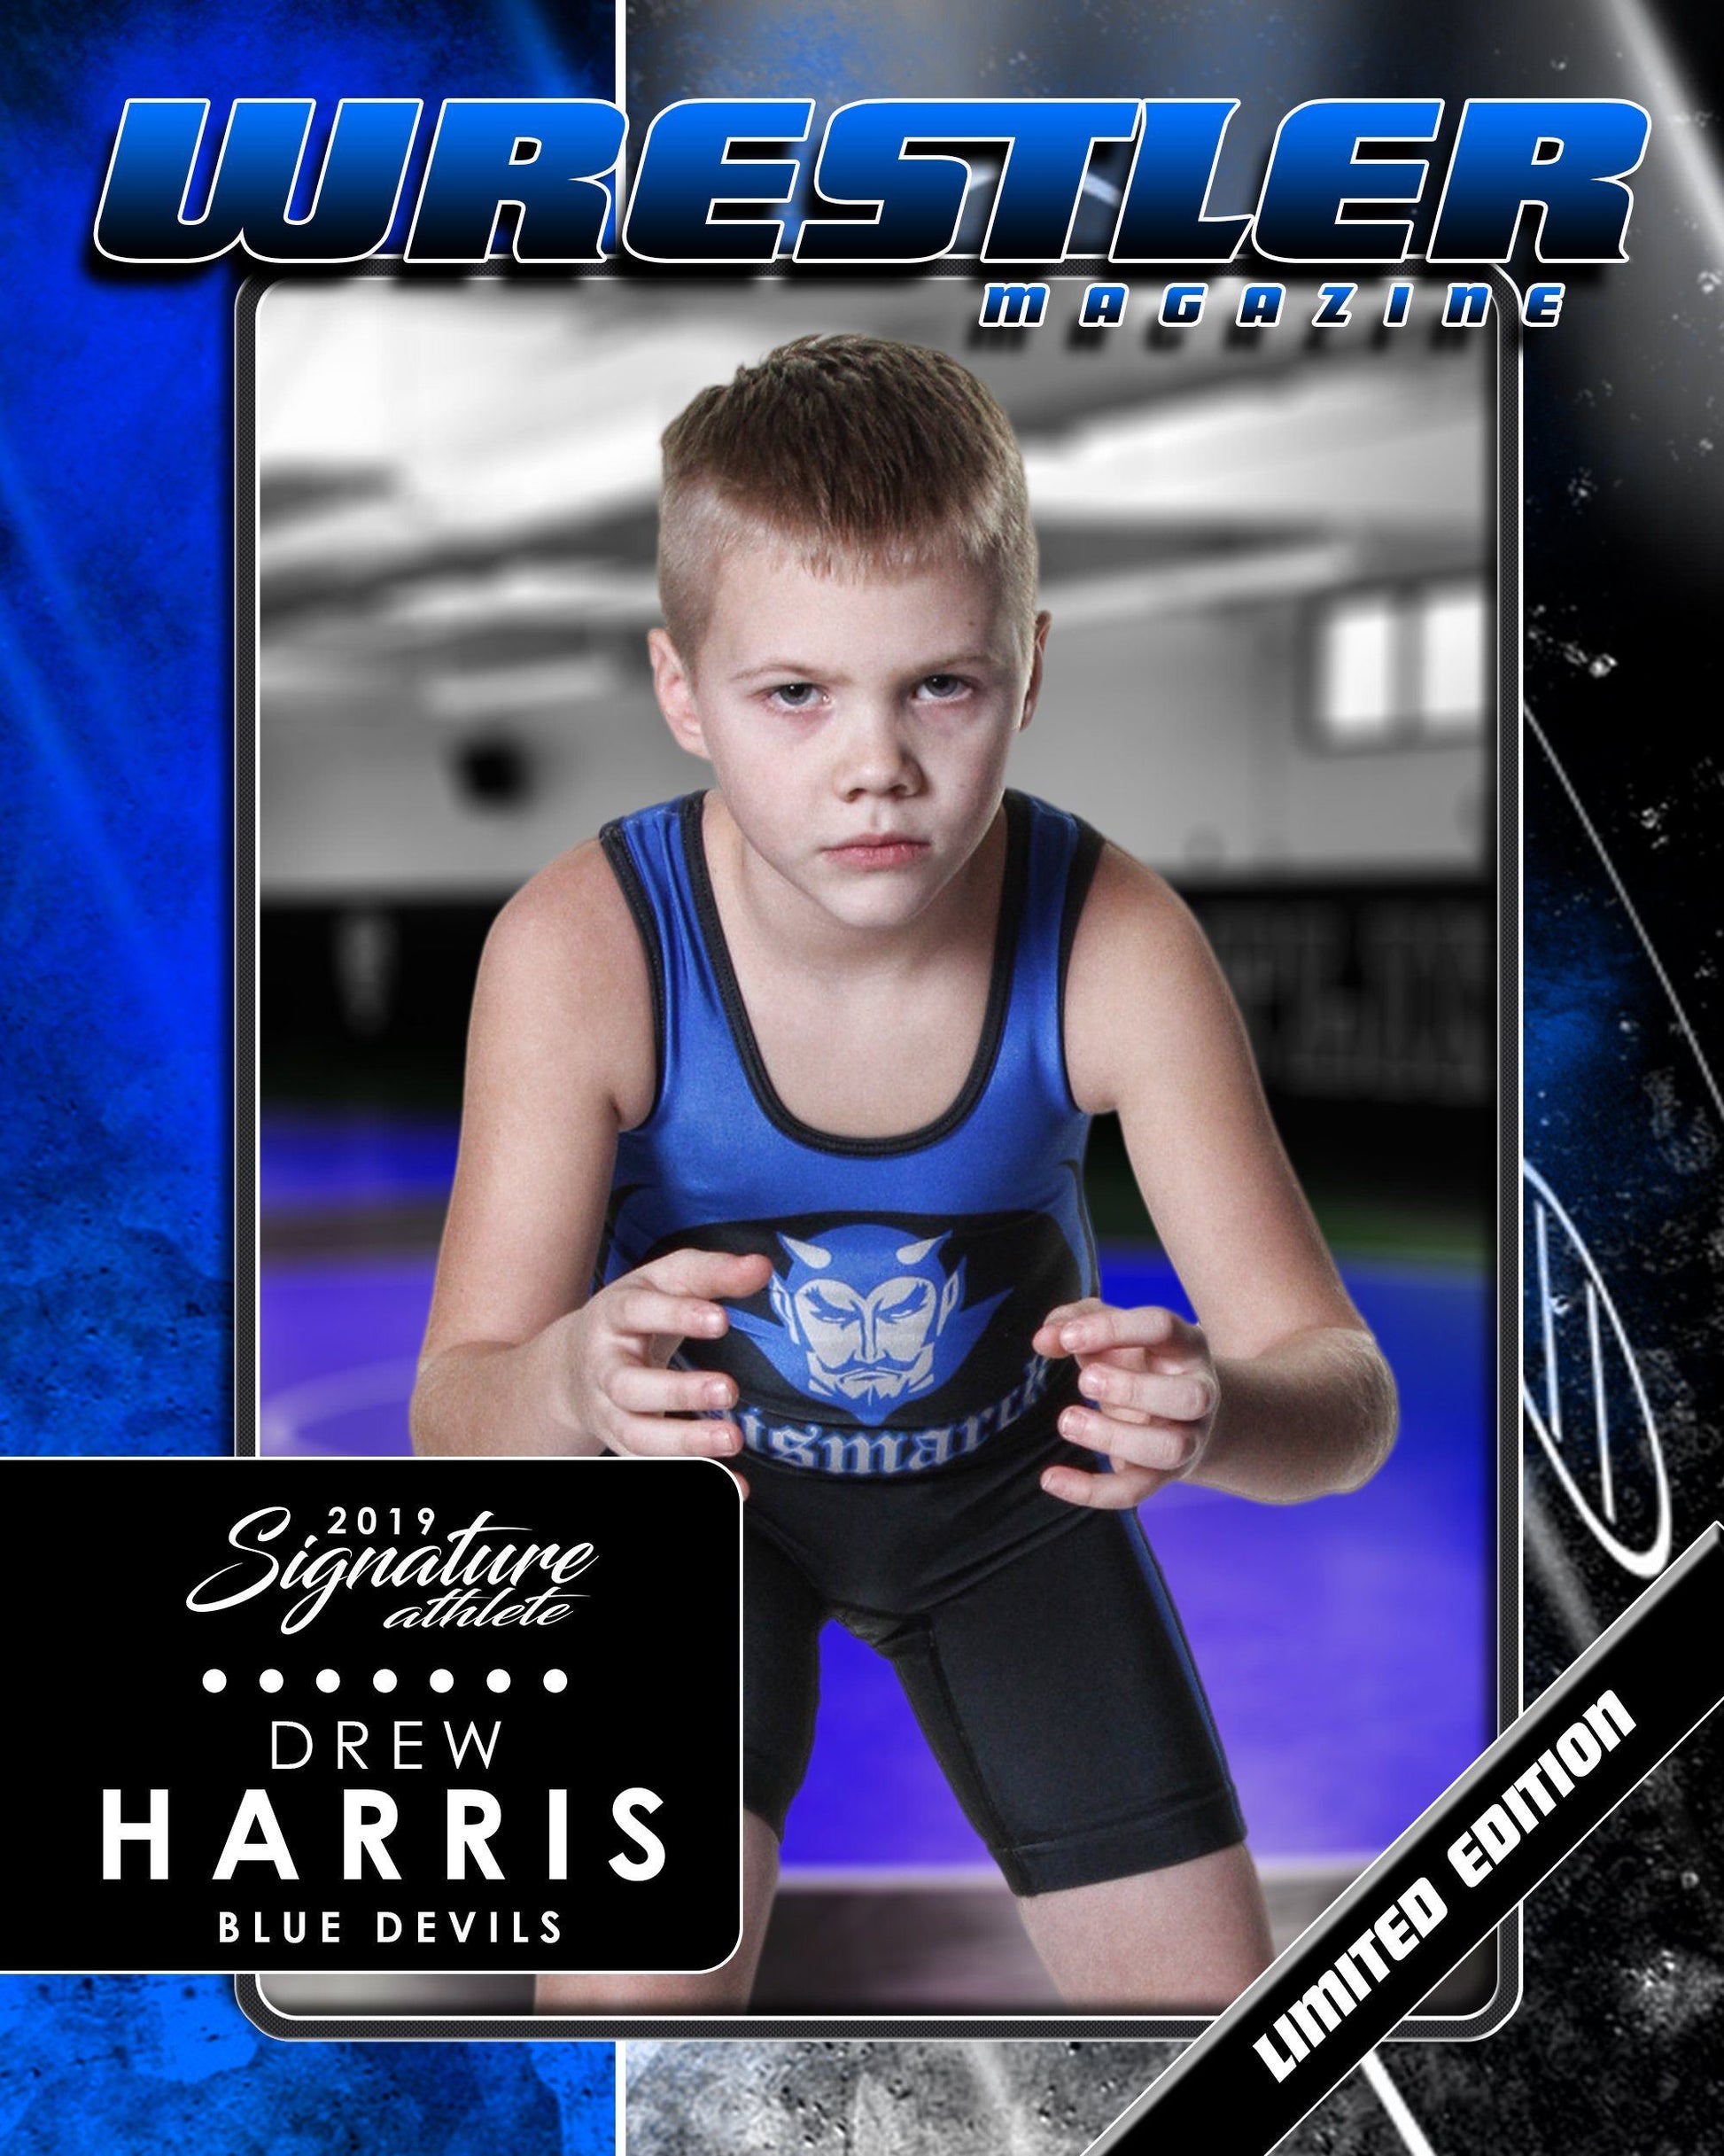 Signature Player - Wrestling - V1 - Drop-In Magazine Cover Template-Photoshop Template - Photo Solutions